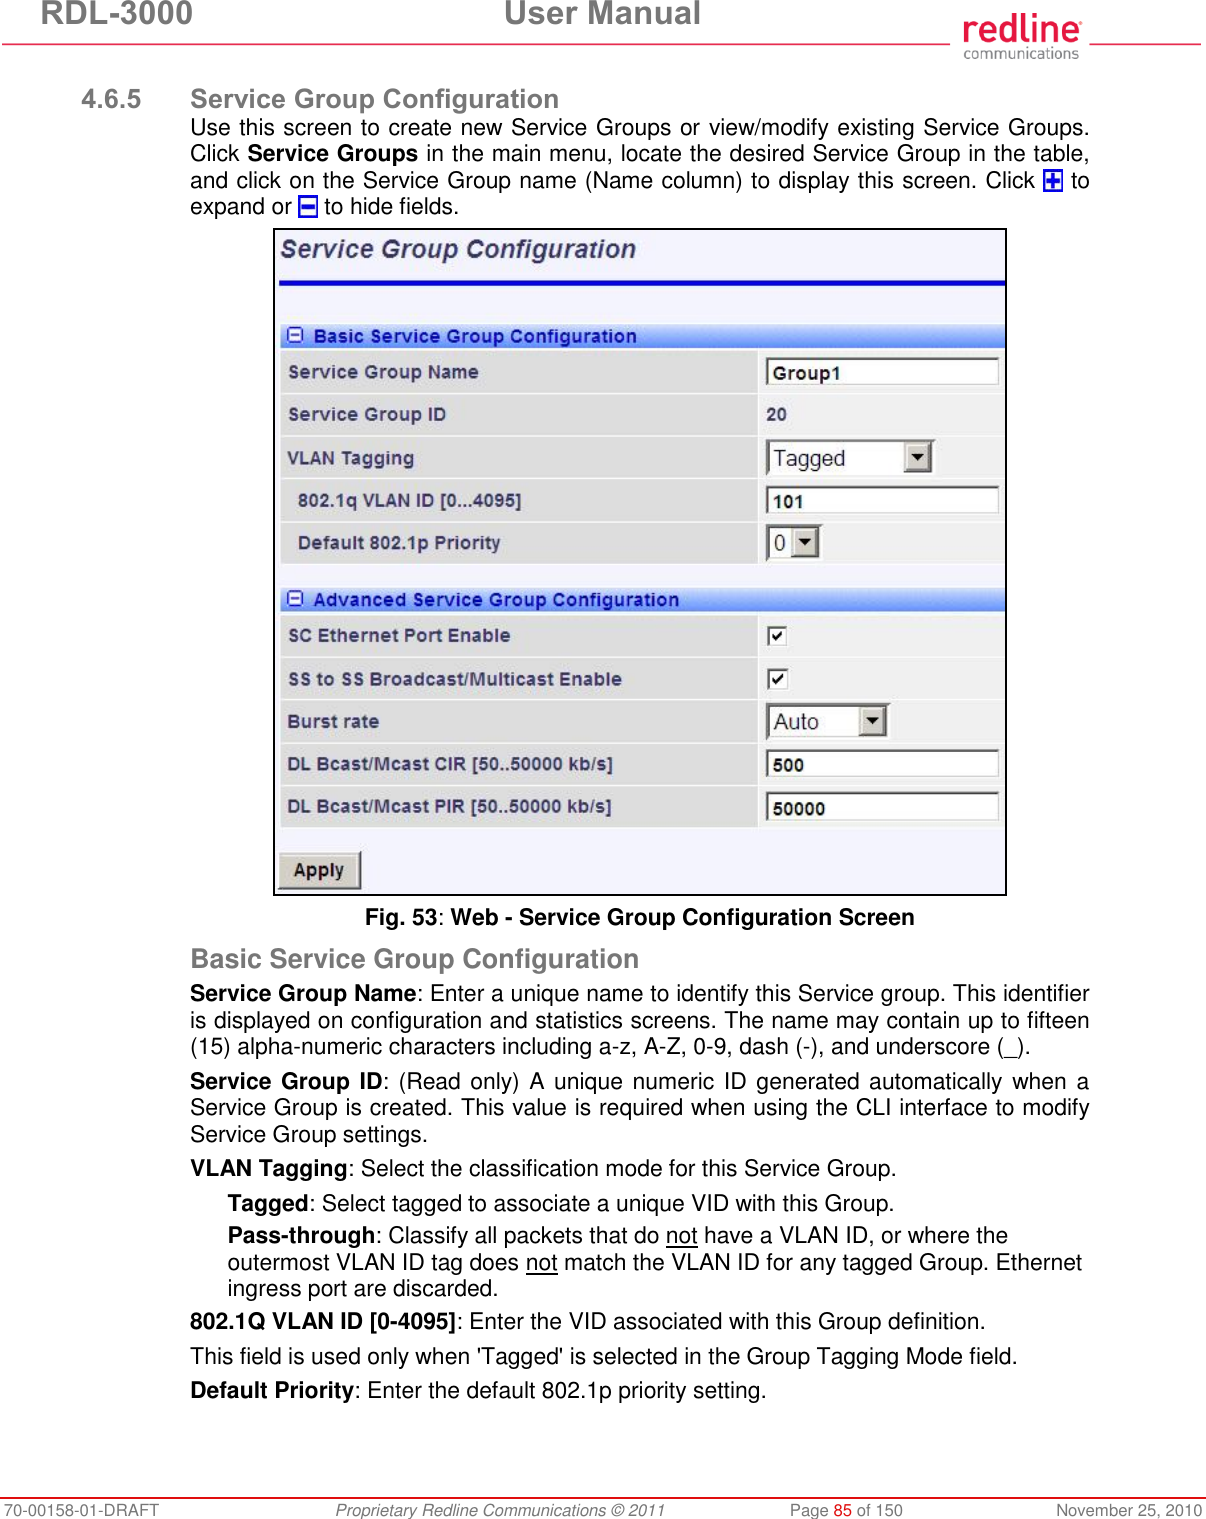 RDL-3000  User Manual 70-00158-01-DRAFT  Proprietary Redline Communications © 2011  Page 85 of 150  November 25, 2010  4.6.5 Service Group Configuration Use this screen to create new Service Groups or view/modify existing Service Groups. Click Service Groups in the main menu, locate the desired Service Group in the table, and click on the Service Group name (Name column) to display this screen. Click   to expand or   to hide fields.  Fig. 53: Web - Service Group Configuration Screen Basic Service Group Configuration Service Group Name: Enter a unique name to identify this Service group. This identifier is displayed on configuration and statistics screens. The name may contain up to fifteen (15) alpha-numeric characters including a-z, A-Z, 0-9, dash (-), and underscore (_). Service Group ID: (Read only) A unique numeric ID generated automatically when a Service Group is created. This value is required when using the CLI interface to modify Service Group settings. VLAN Tagging: Select the classification mode for this Service Group. Tagged: Select tagged to associate a unique VID with this Group. Pass-through: Classify all packets that do not have a VLAN ID, or where the outermost VLAN ID tag does not match the VLAN ID for any tagged Group. Ethernet ingress port are discarded.  802.1Q VLAN ID [0-4095]: Enter the VID associated with this Group definition. This field is used only when &apos;Tagged&apos; is selected in the Group Tagging Mode field. Default Priority: Enter the default 802.1p priority setting. 